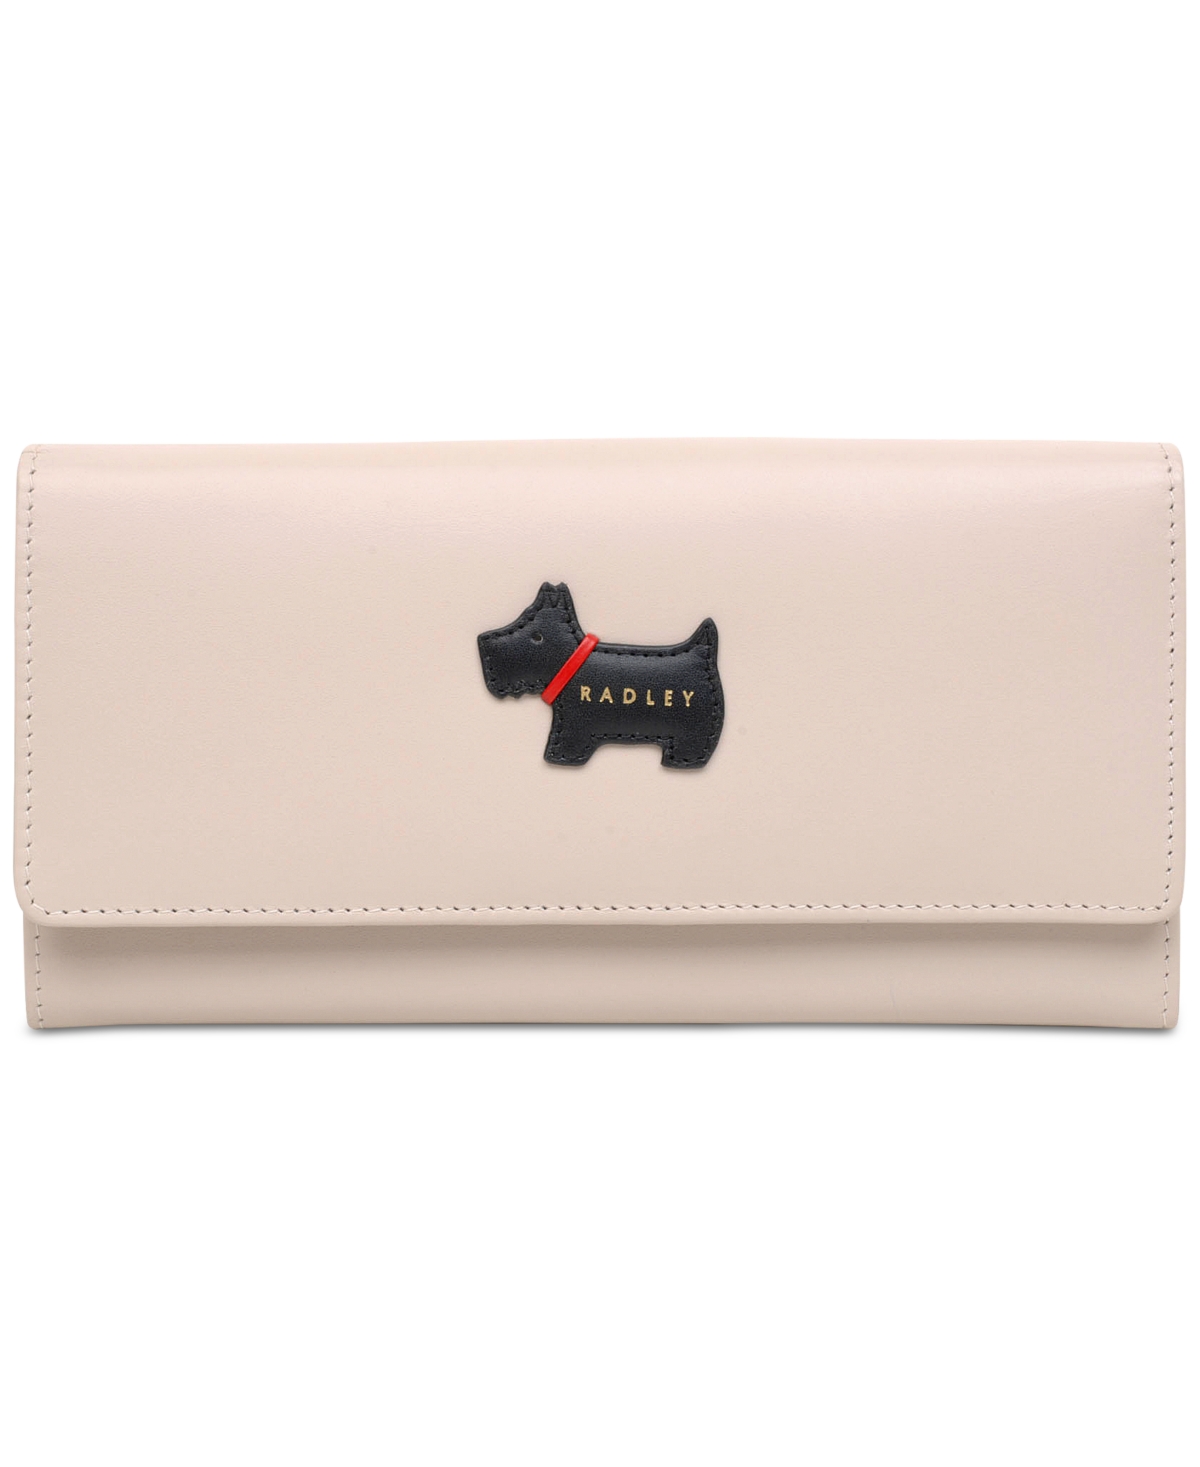 Women's Heritage Radley Large Leather Flapover Wallet - Dove Grey/Gold